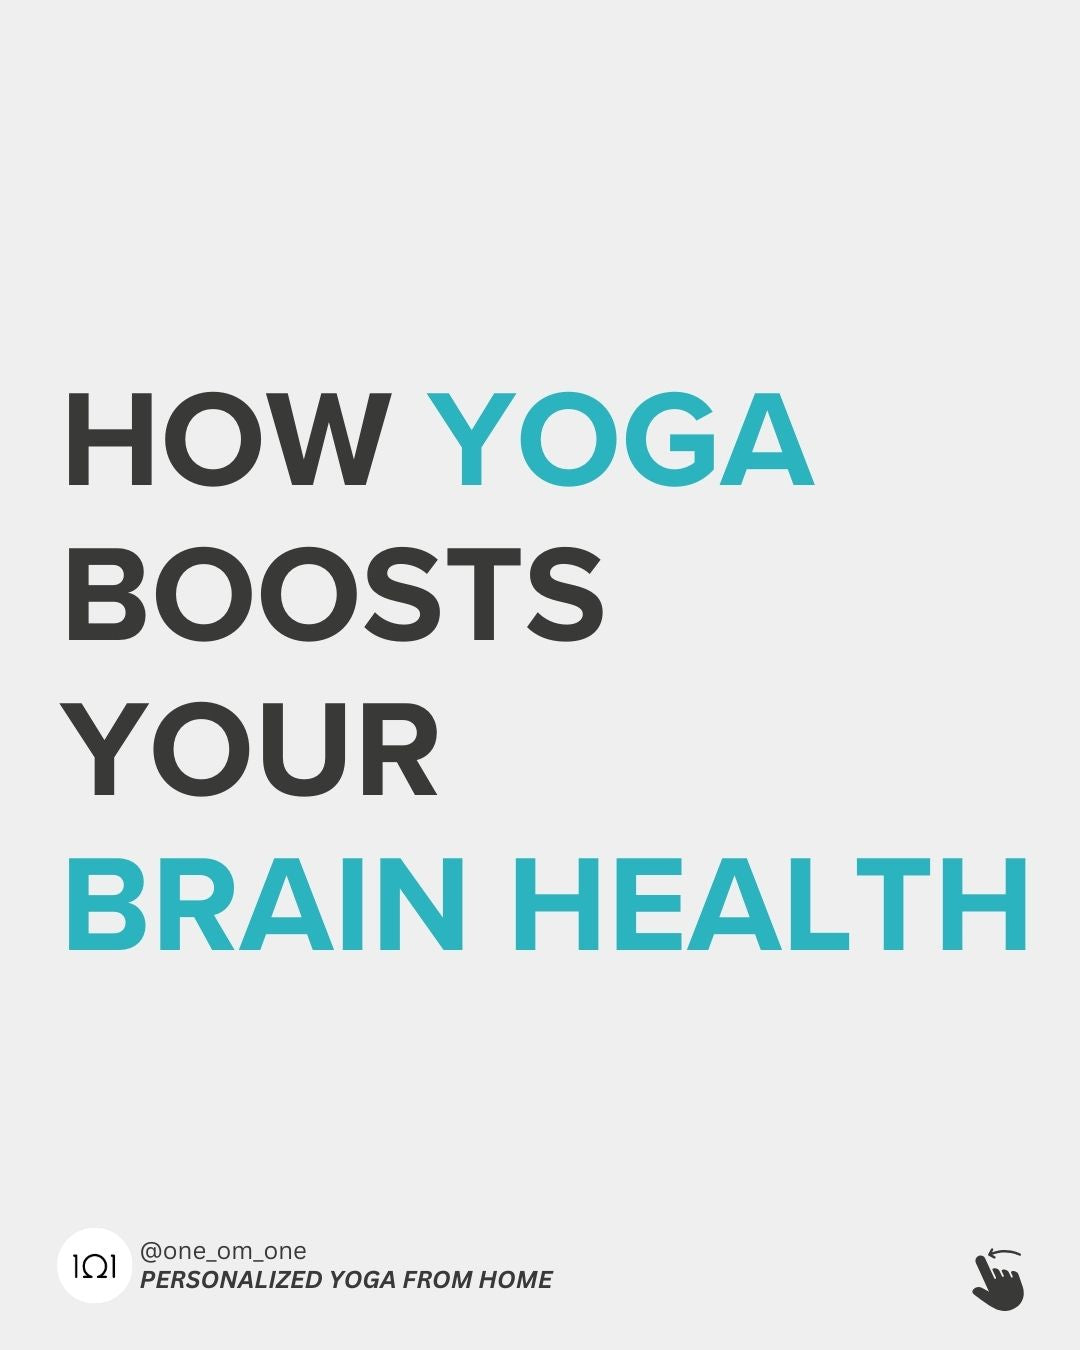 Yoga with focus on breathwork & meditation can actually improve memory and brain function in women!